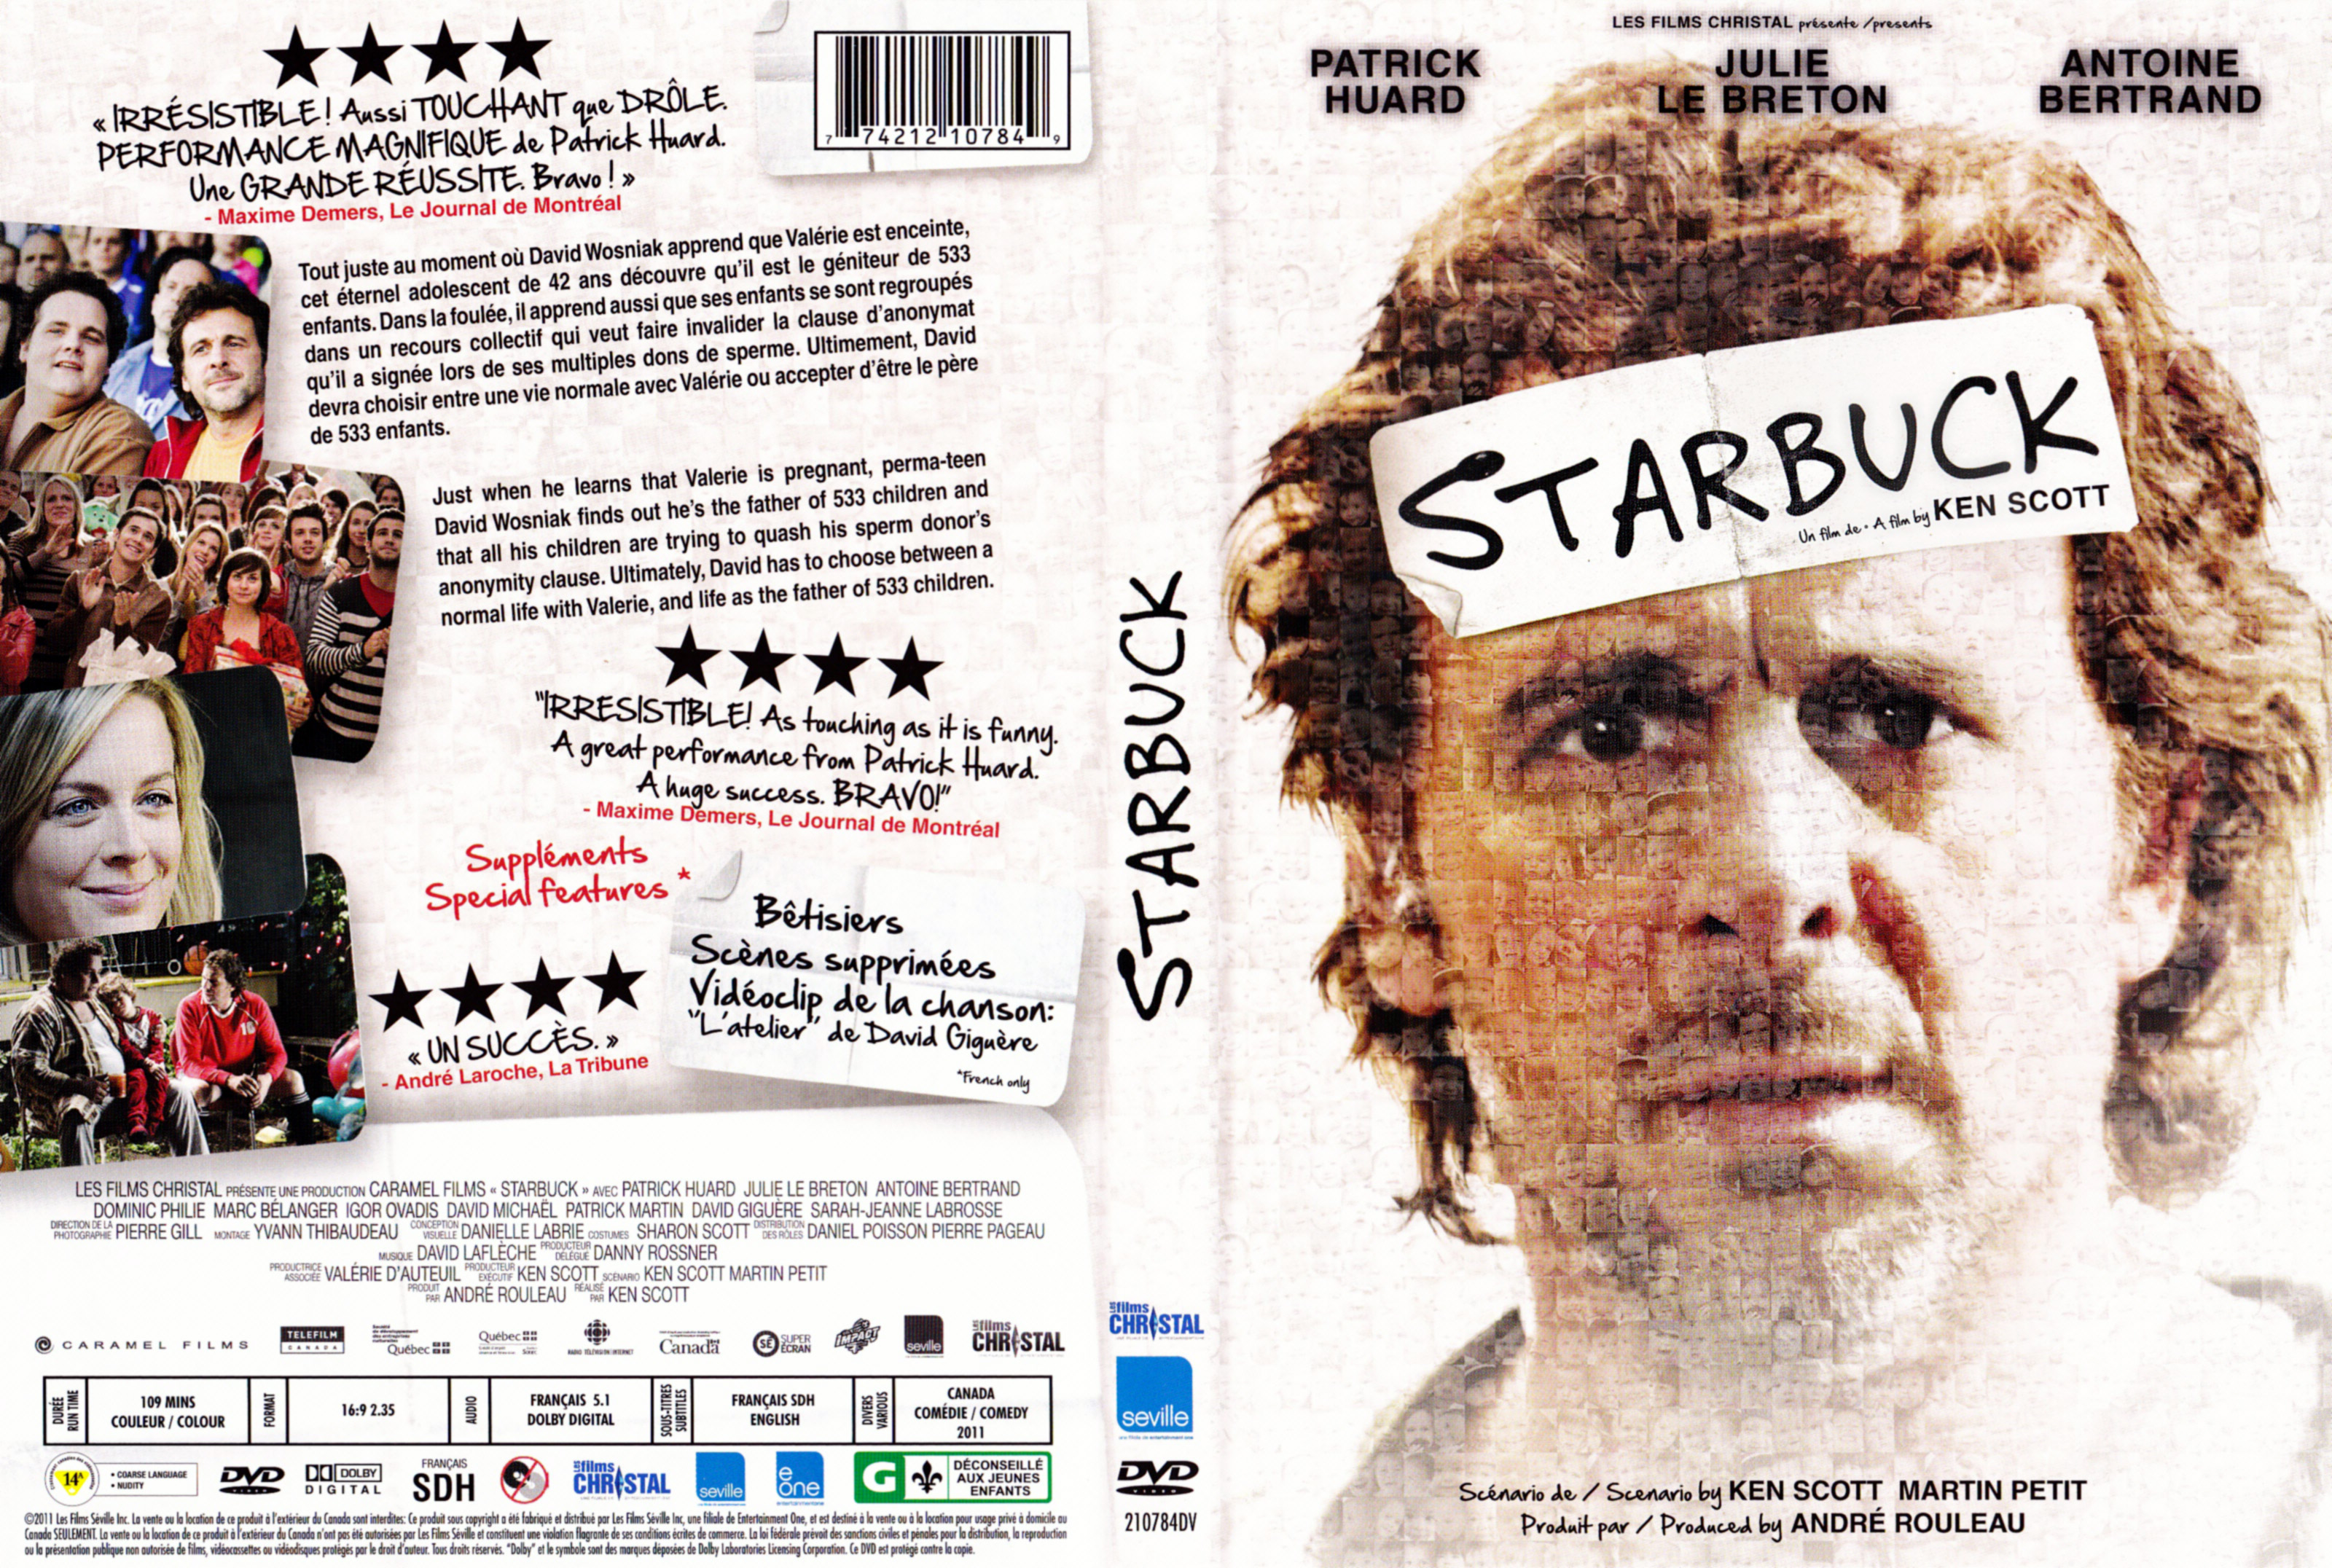 Jaquette DVD Starbuck (Canadienne)